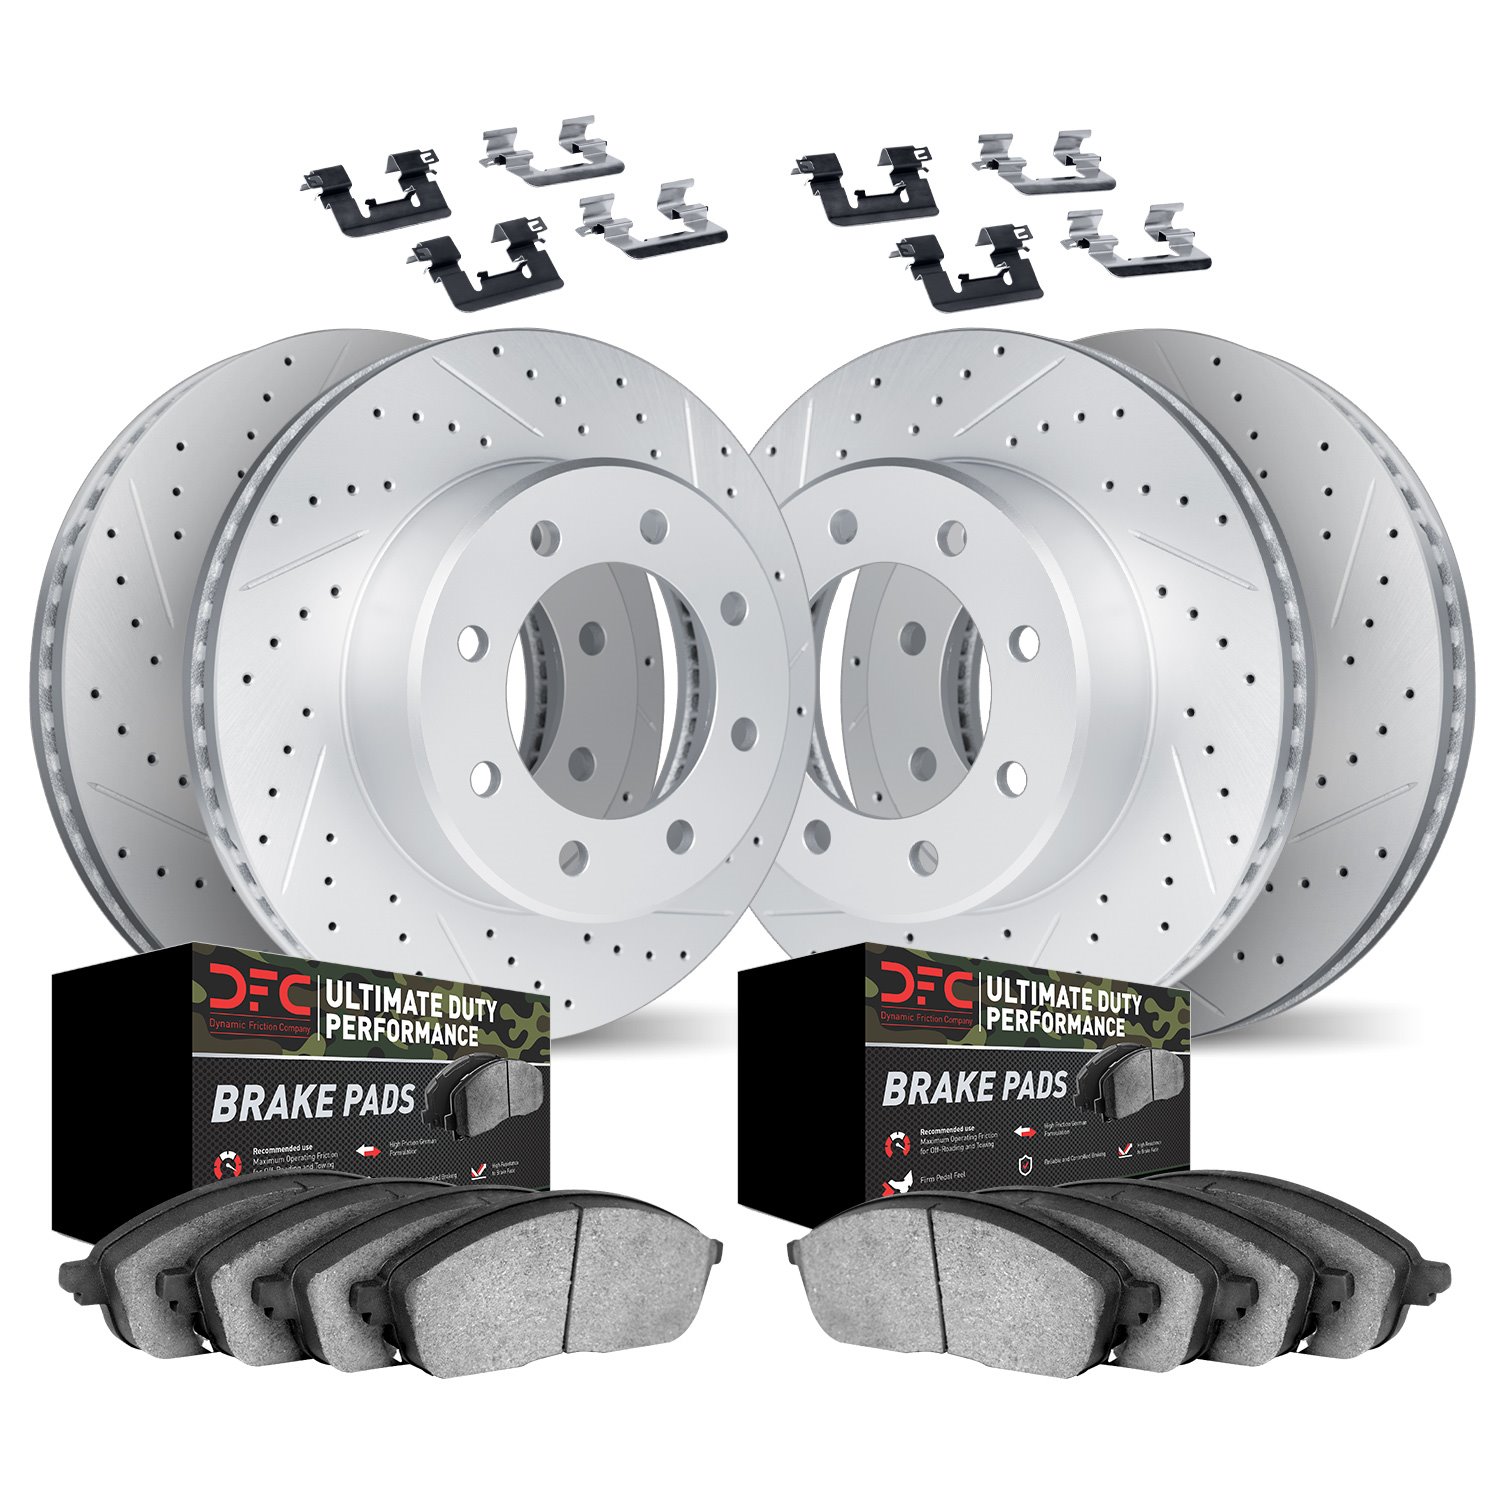 2414-54029 Geoperformance Drilled/Slotted Brake Rotors with Ultimate-Duty Brake Pads Kit & Hardware, 2005-2010 Ford/Lincoln/Merc